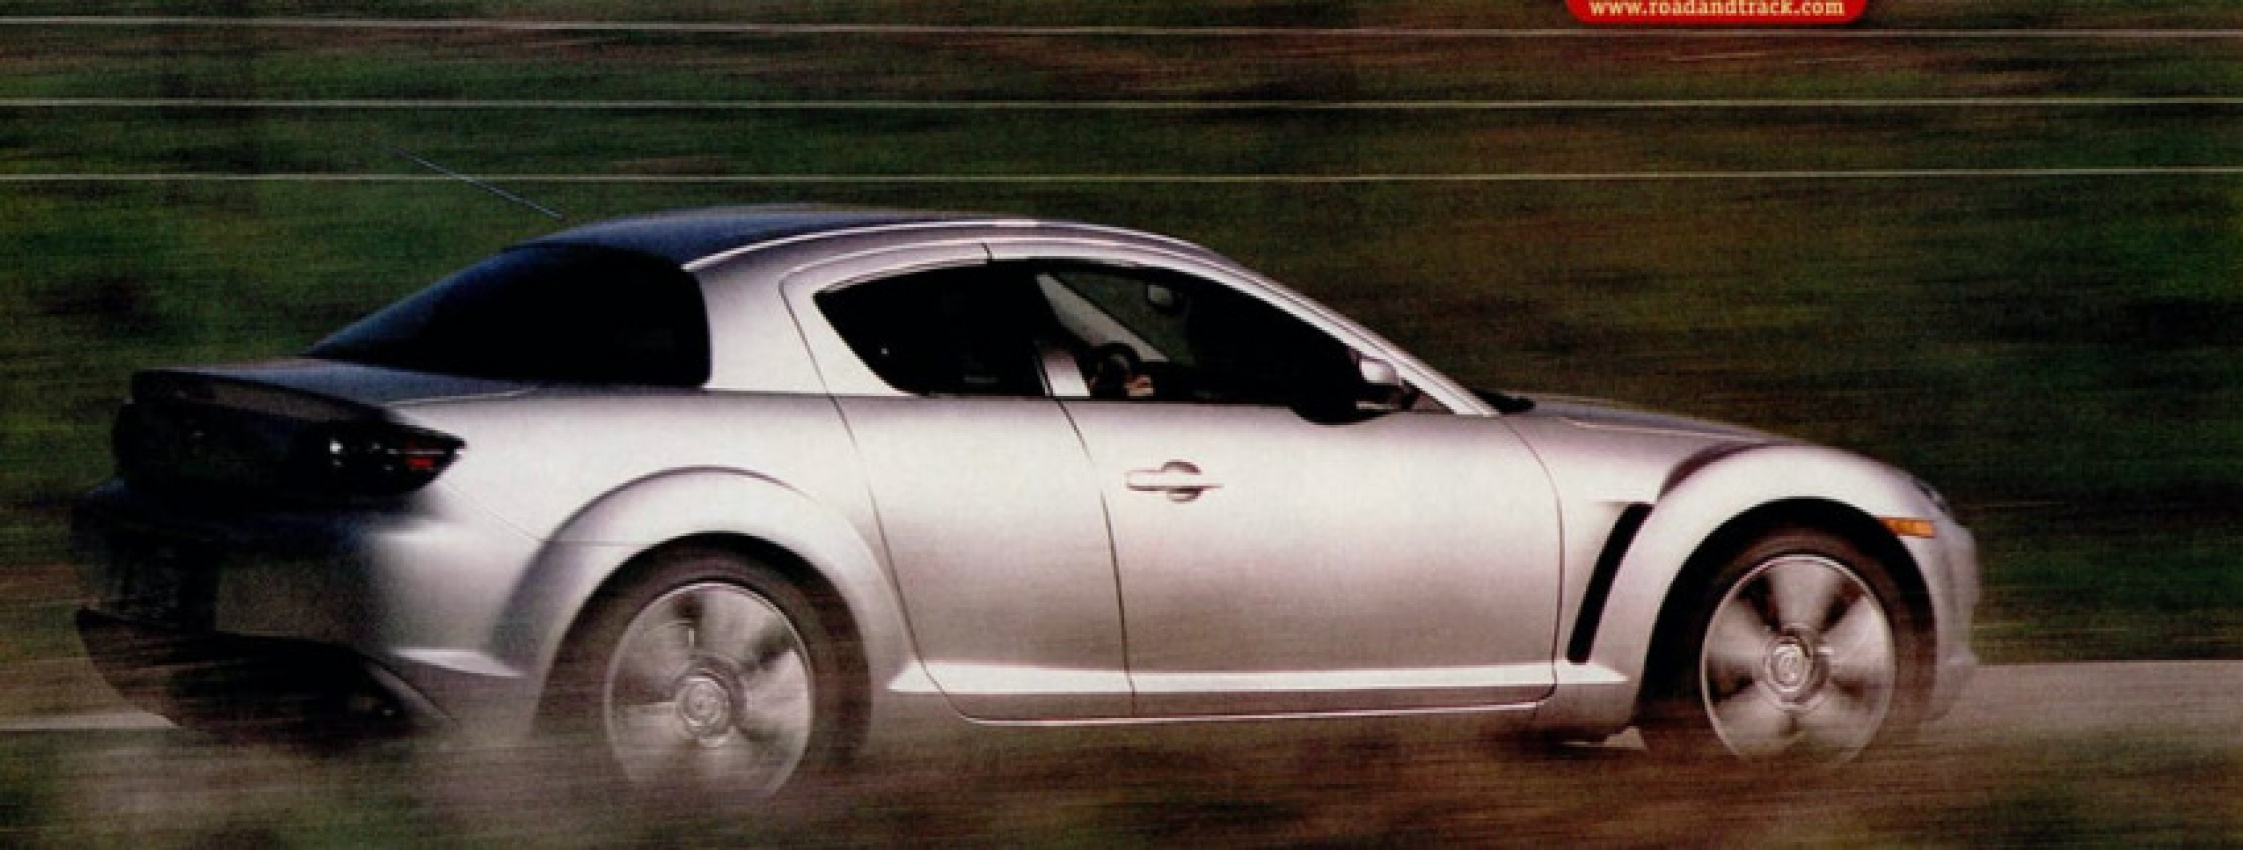 autos, car culture, cars, mazda, the mazda rx-8 challenges the meaning of sports car